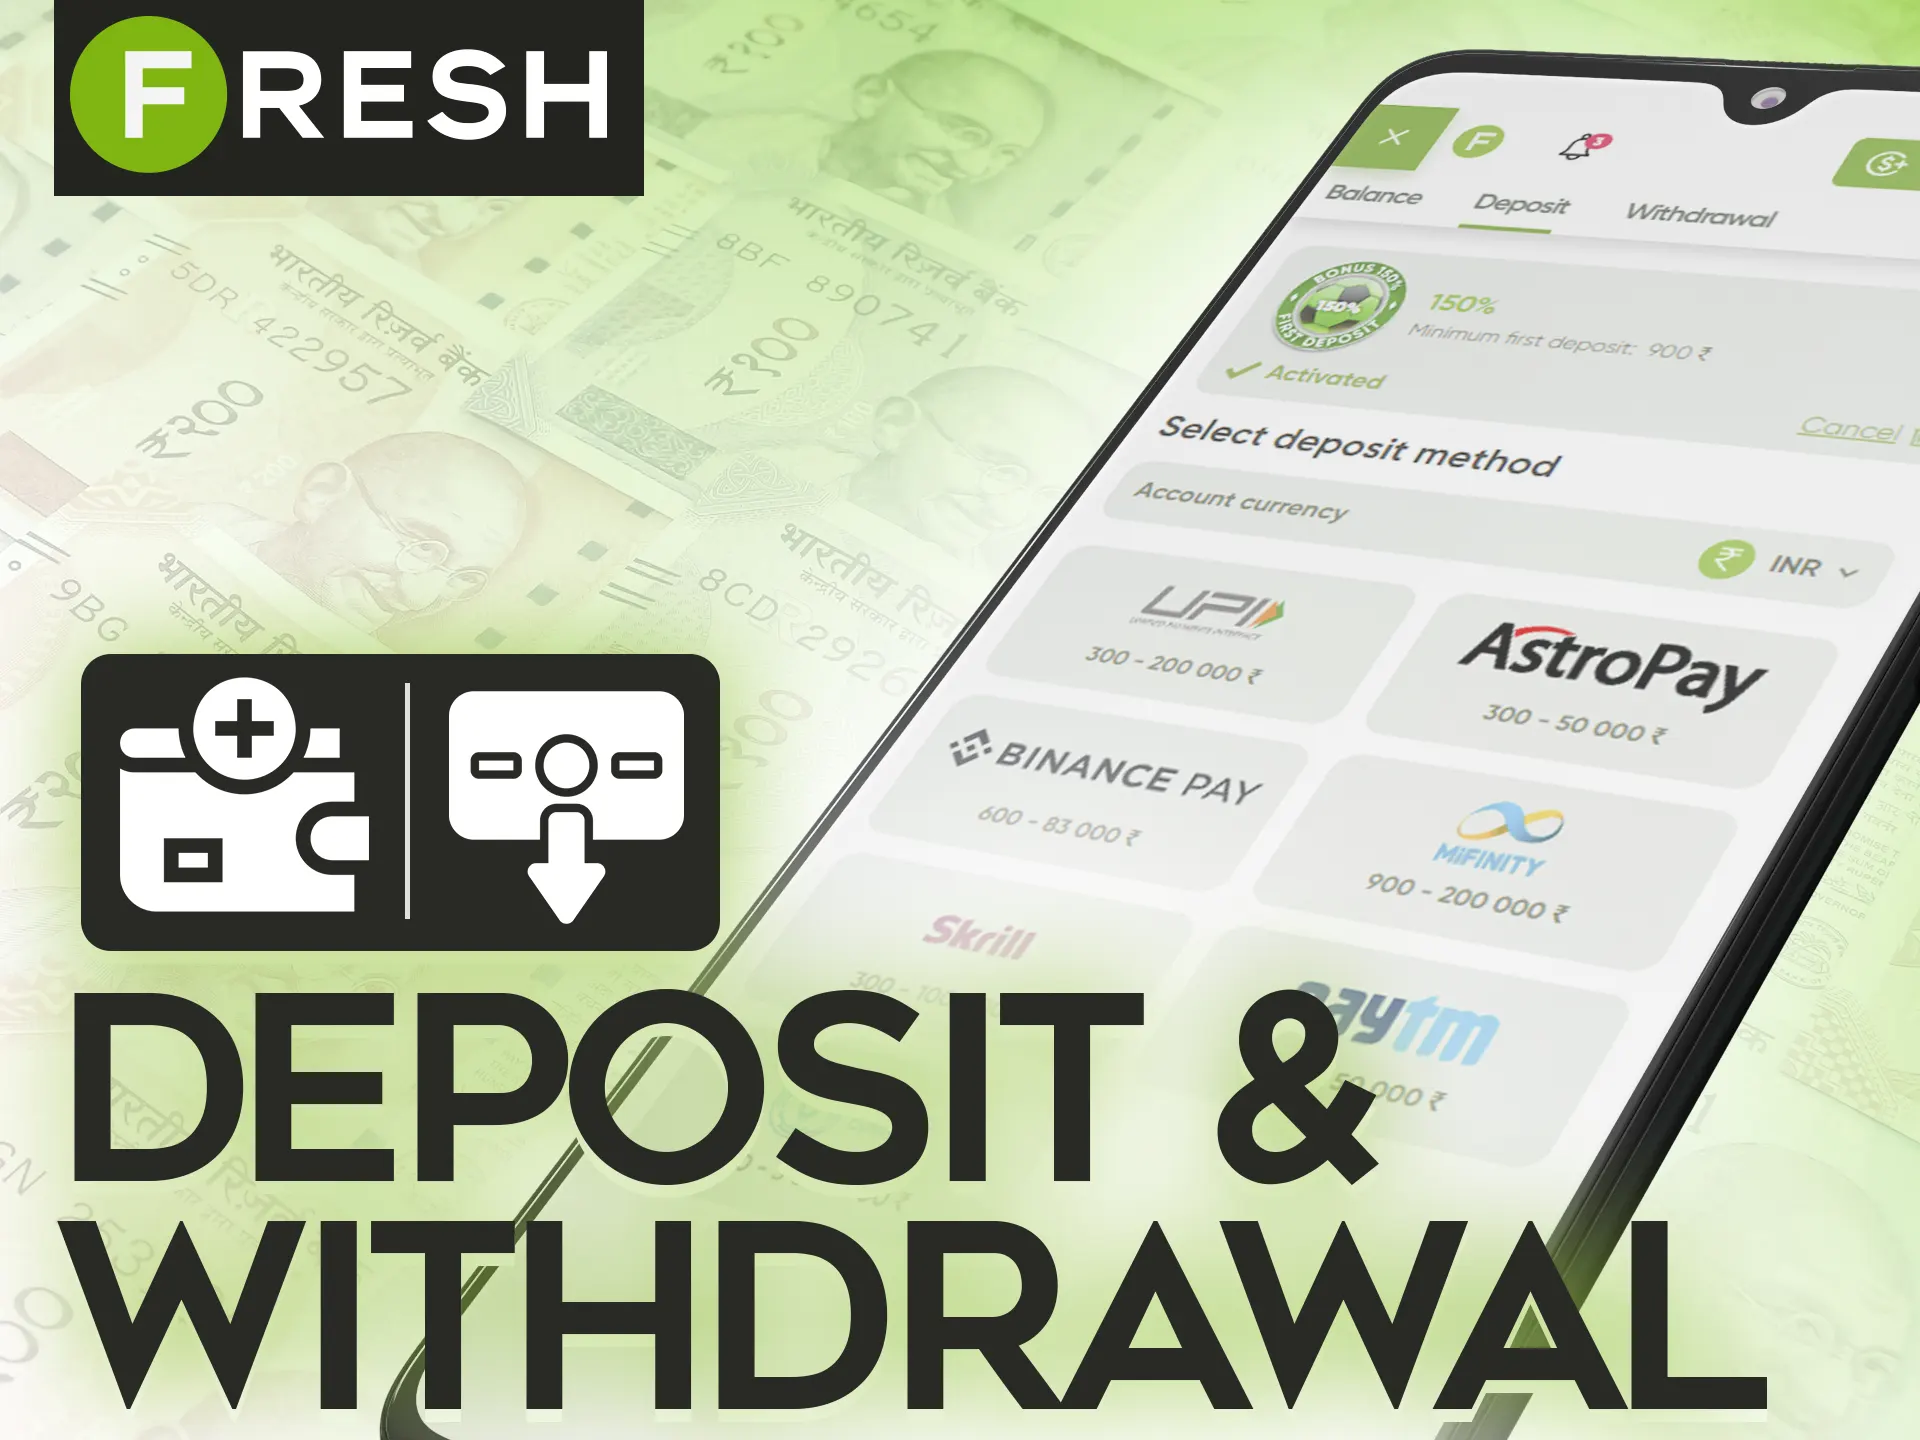 Deposit and withdraw money in the Fresh Casino app without any problems.